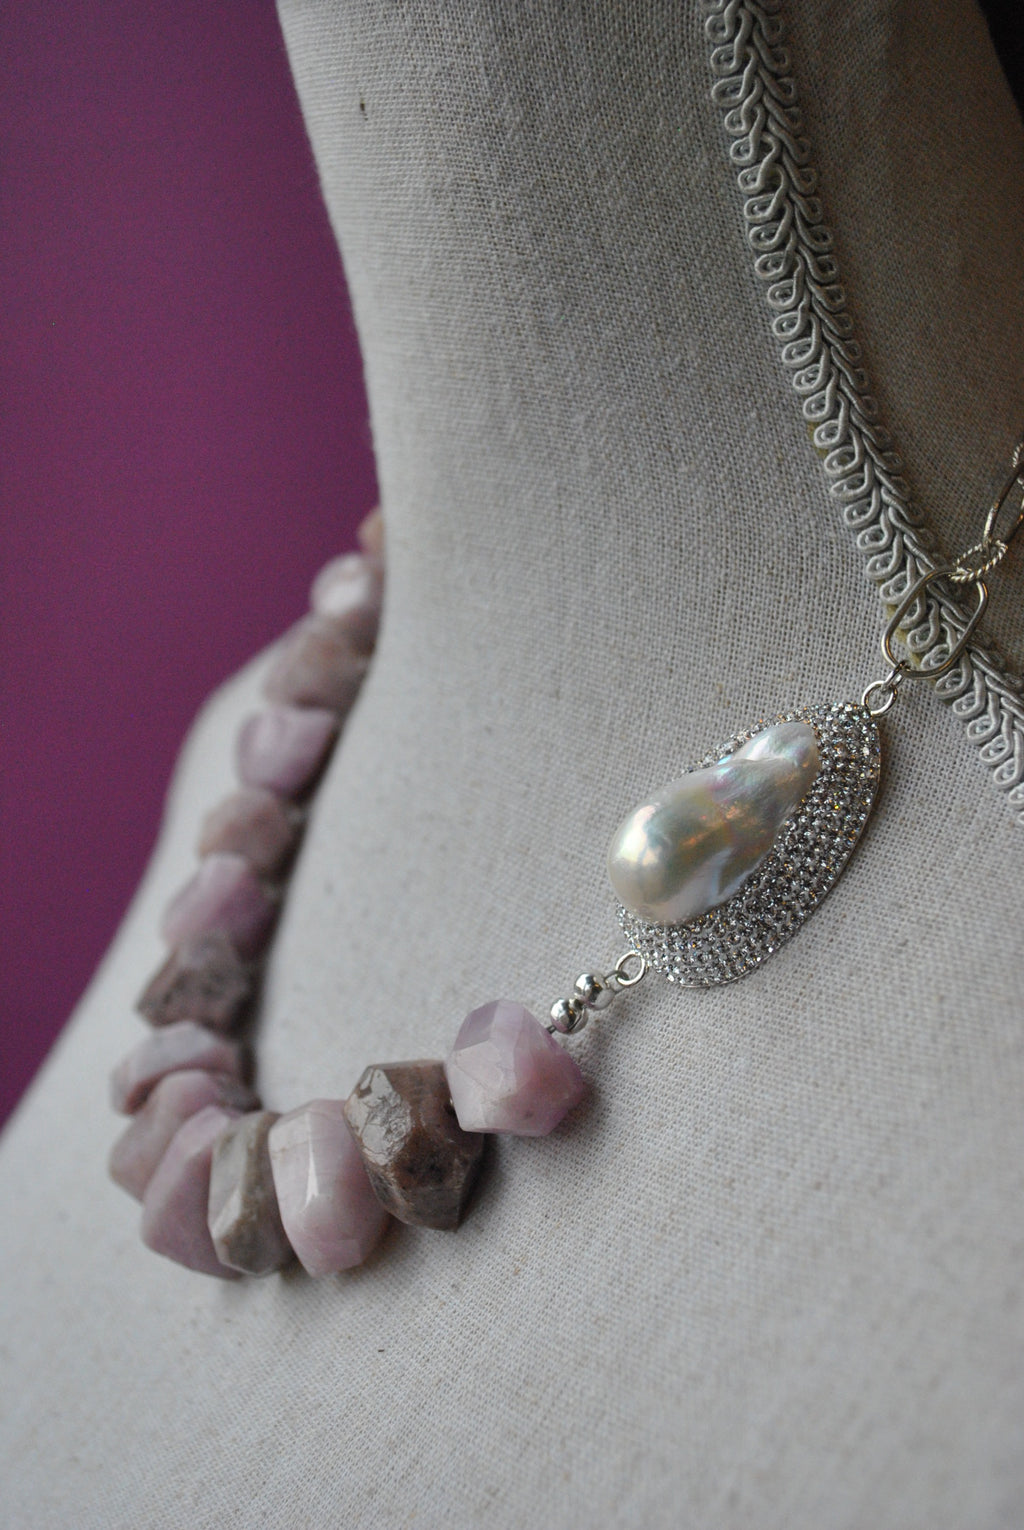 LAVENDER KANZANITE WITH MOTHER OF PEARLS AND SWAROVSKI CRYSTALS ASYMMETRIC STATEMENT NECKLACE